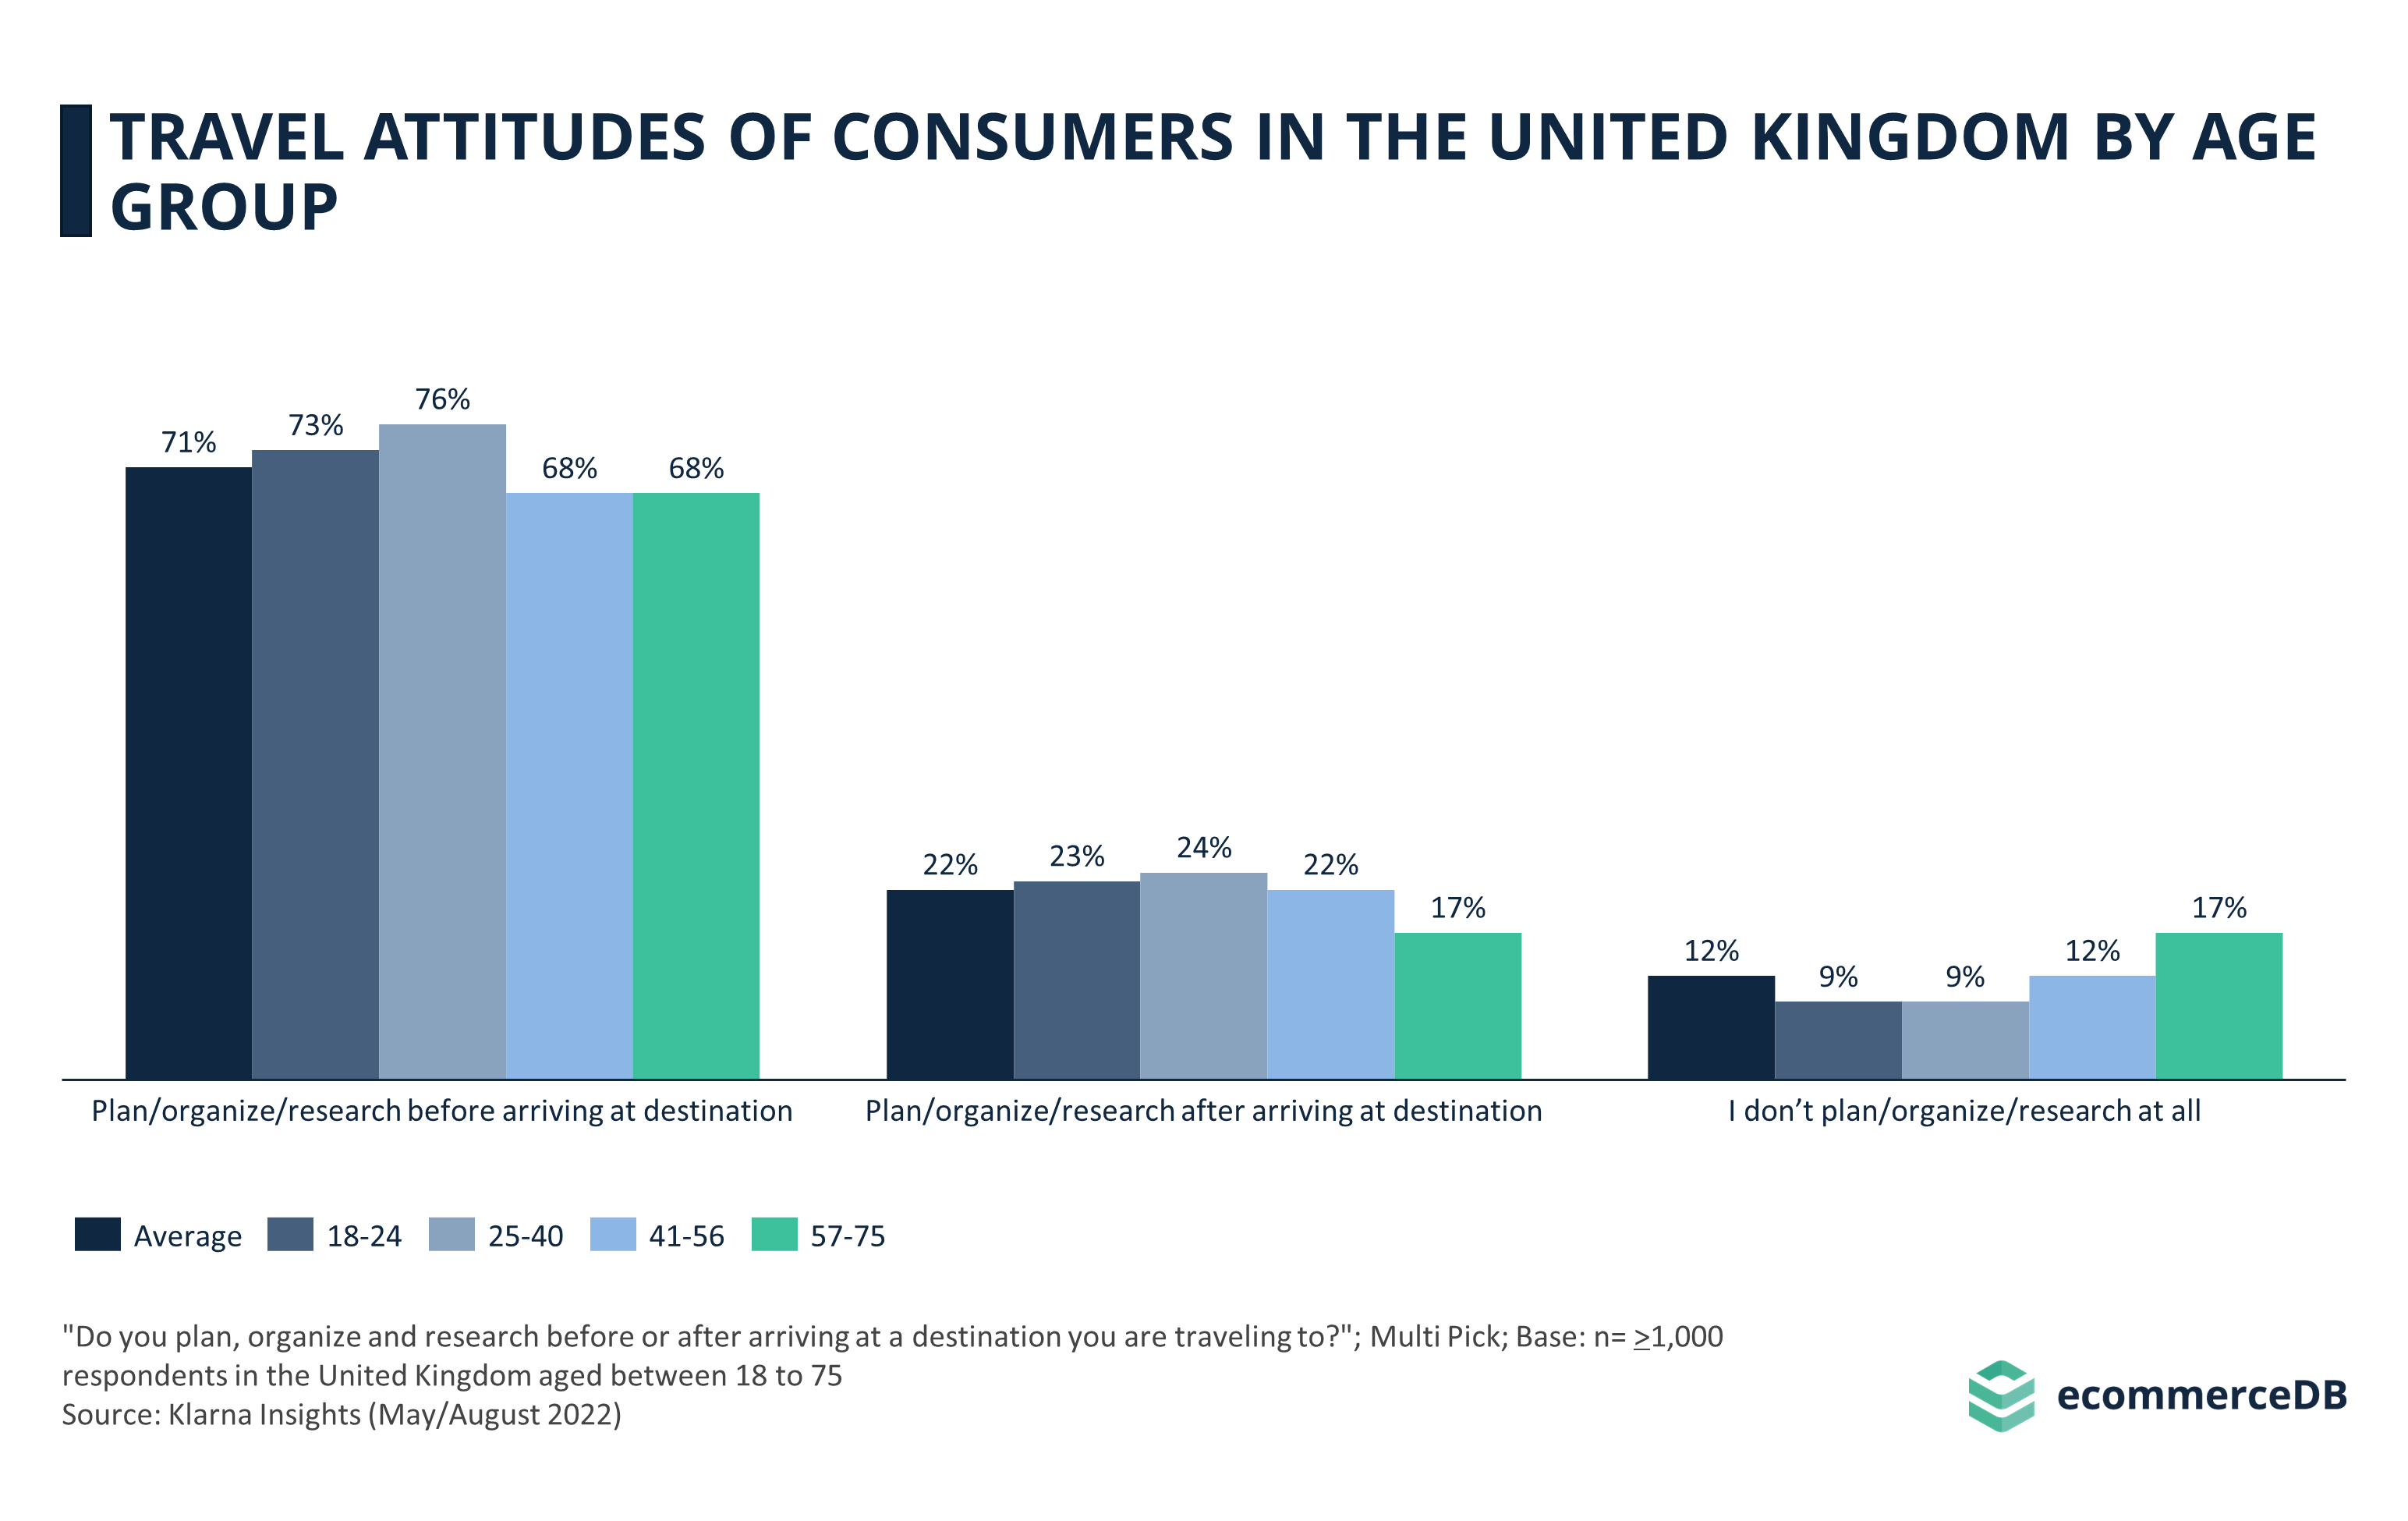 Travel Attitudes of Consumers in the United Kingdom by Age Group